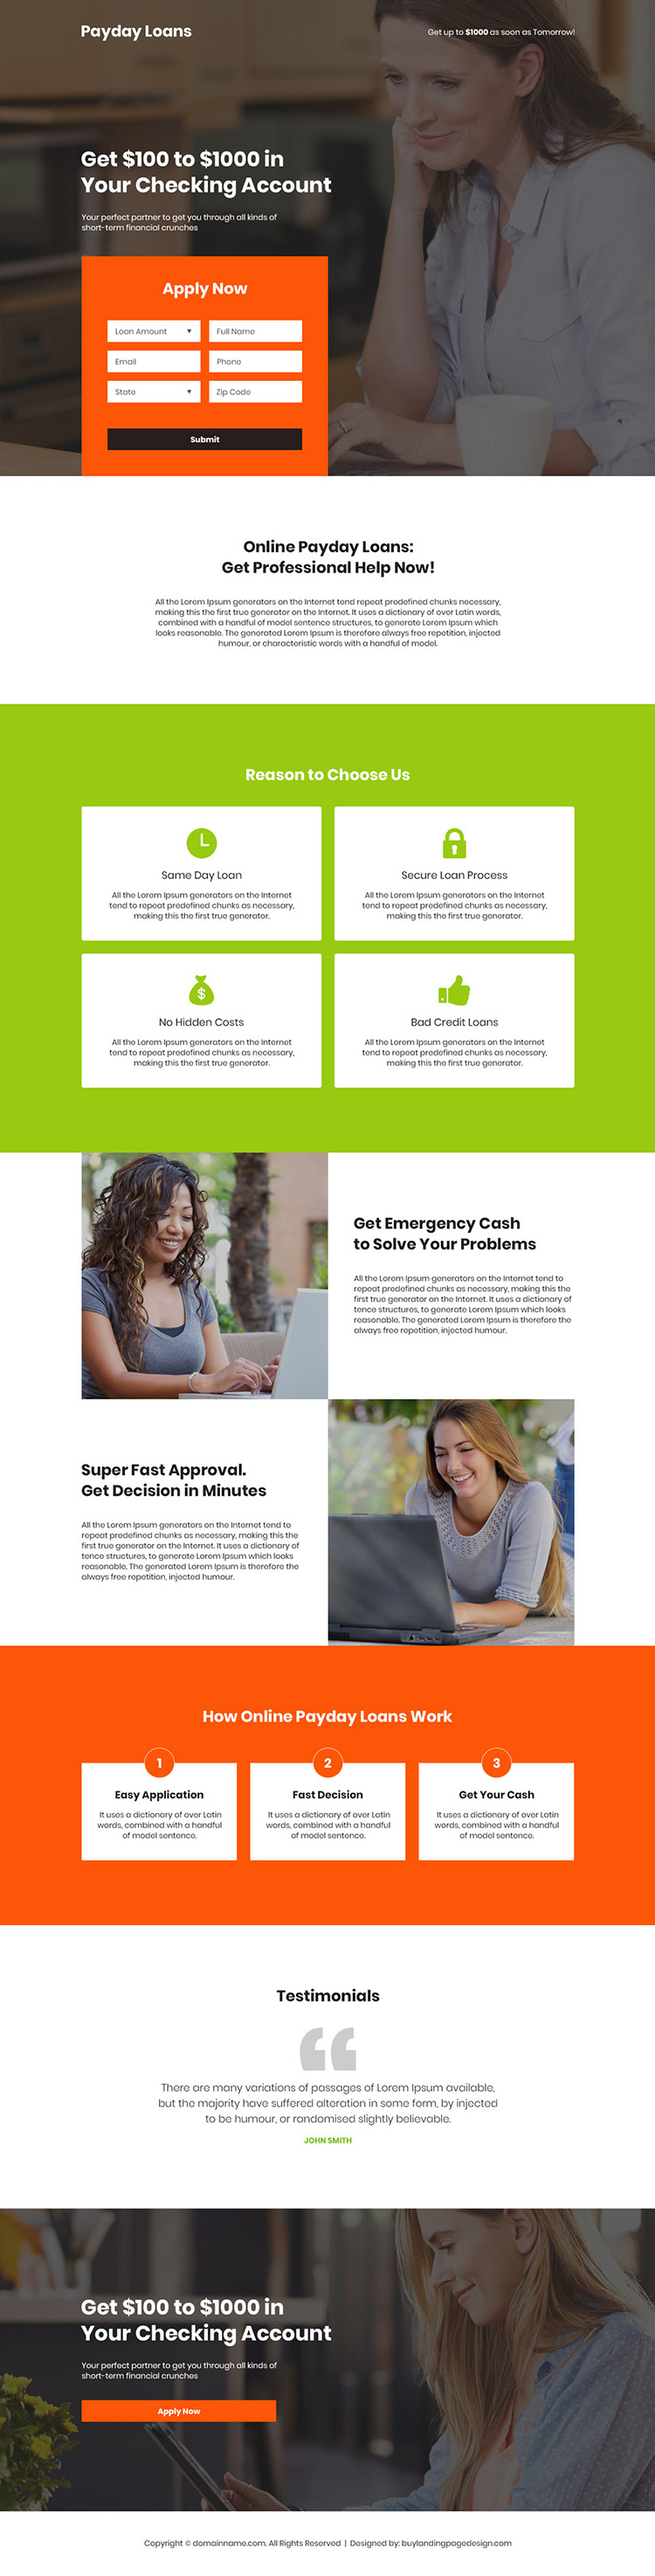 online payday loan responsive landing page design